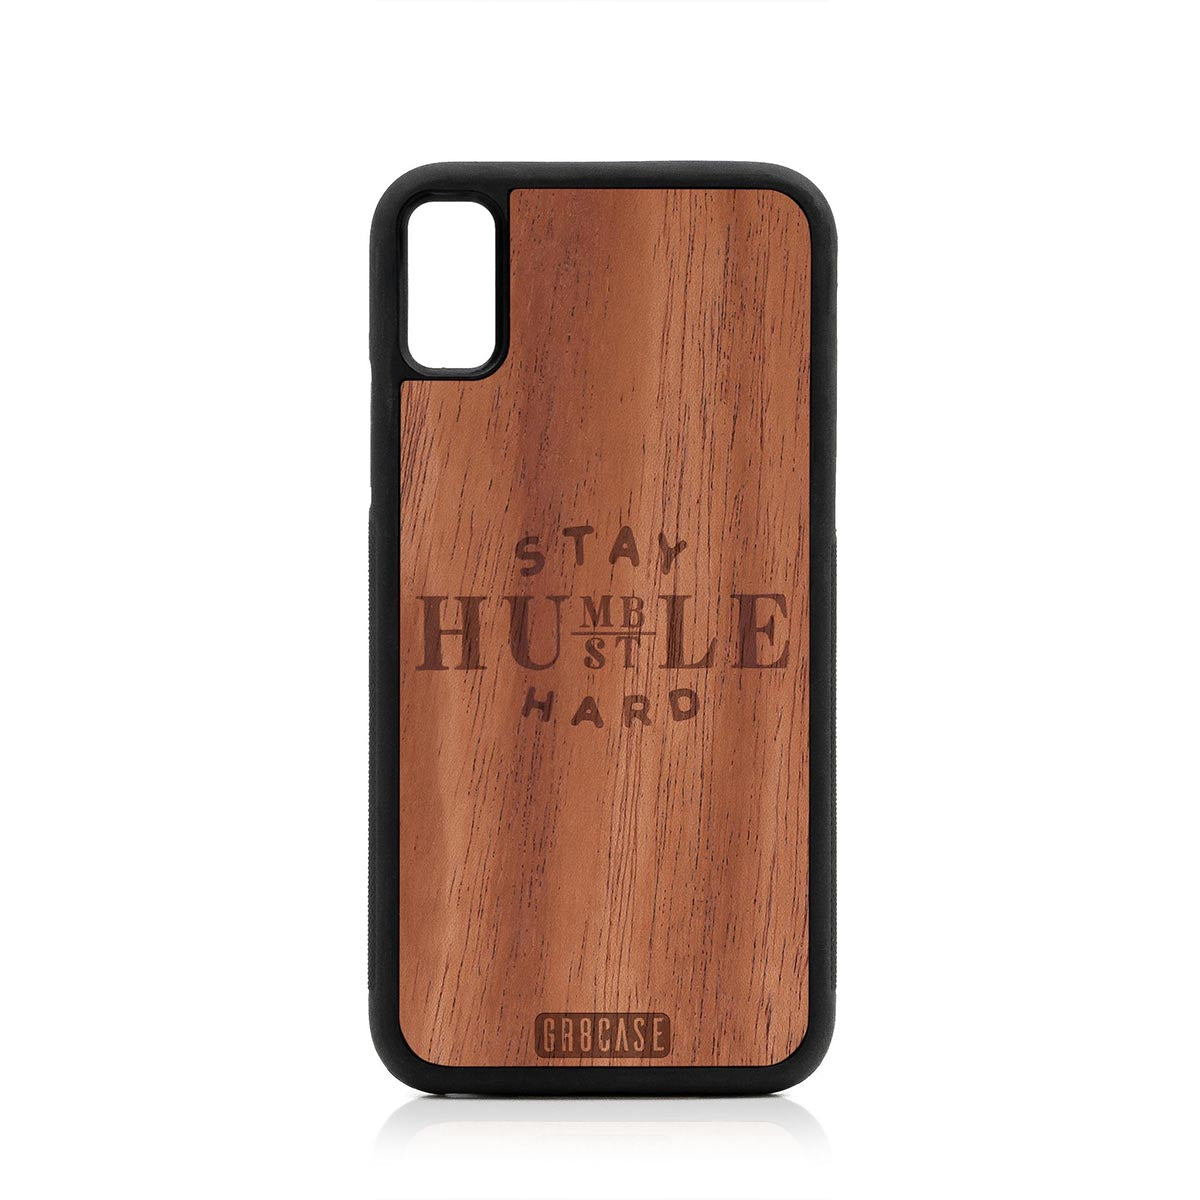 Stay Humble Hustle Hard Design Wood Case For iPhone XS Max by GR8CASE